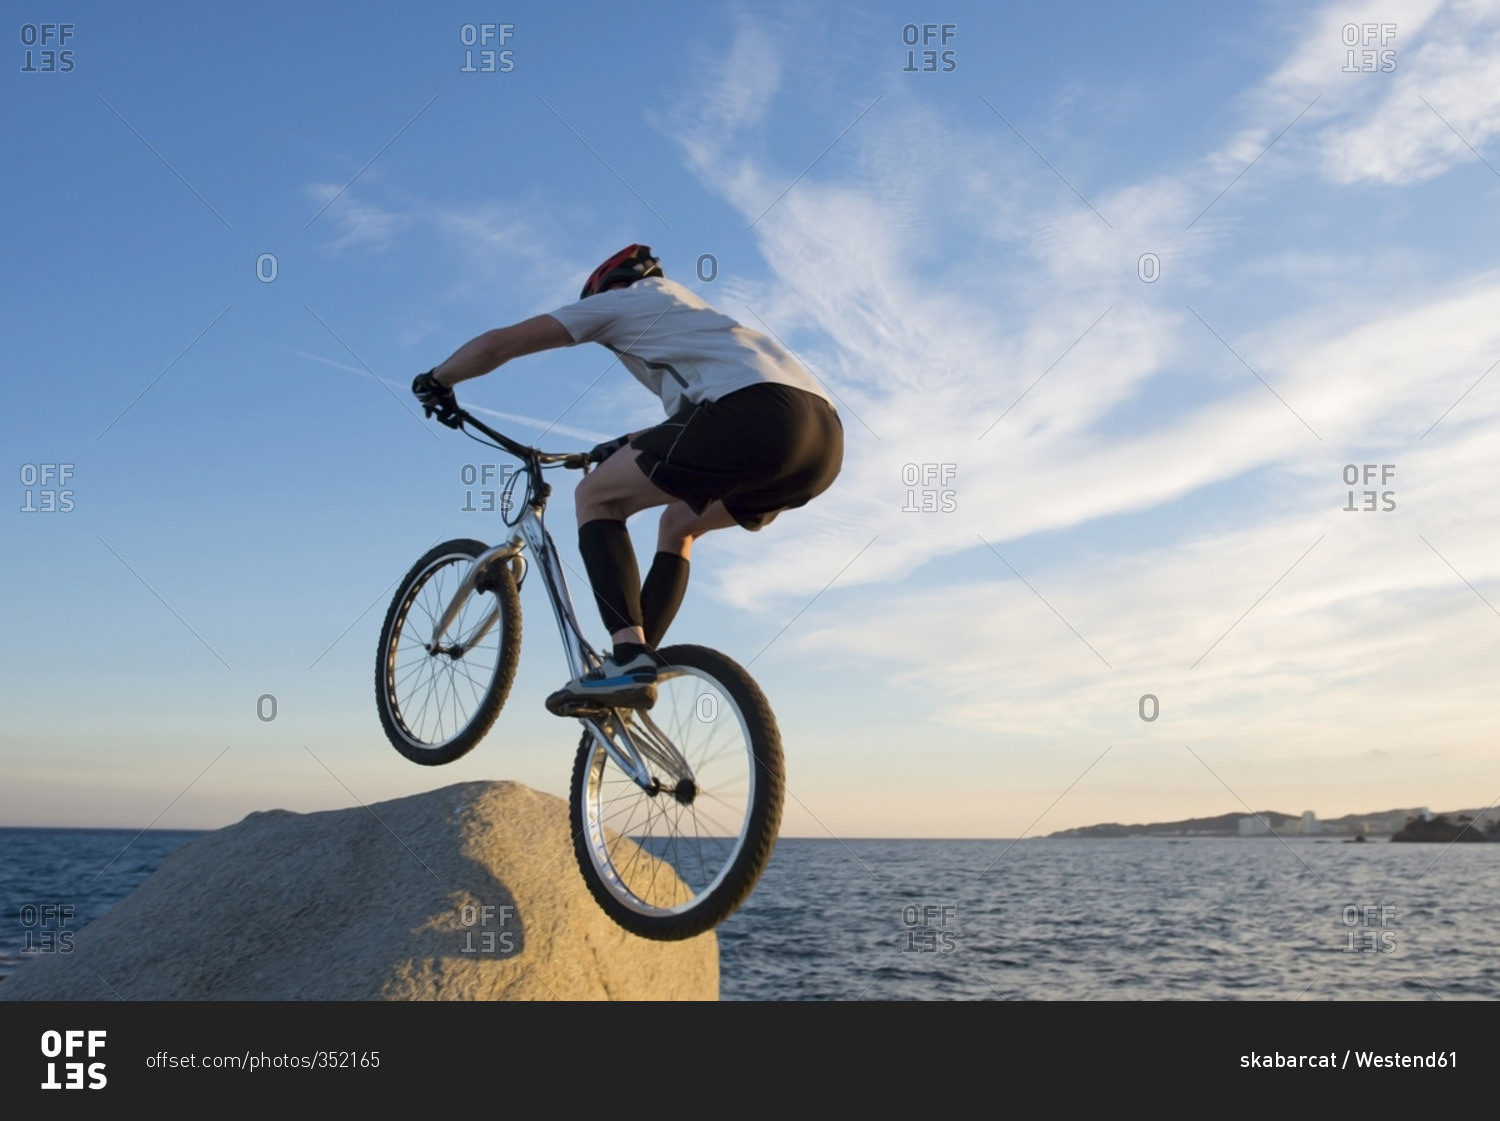 Bmx rider jumping on a rock in the evening